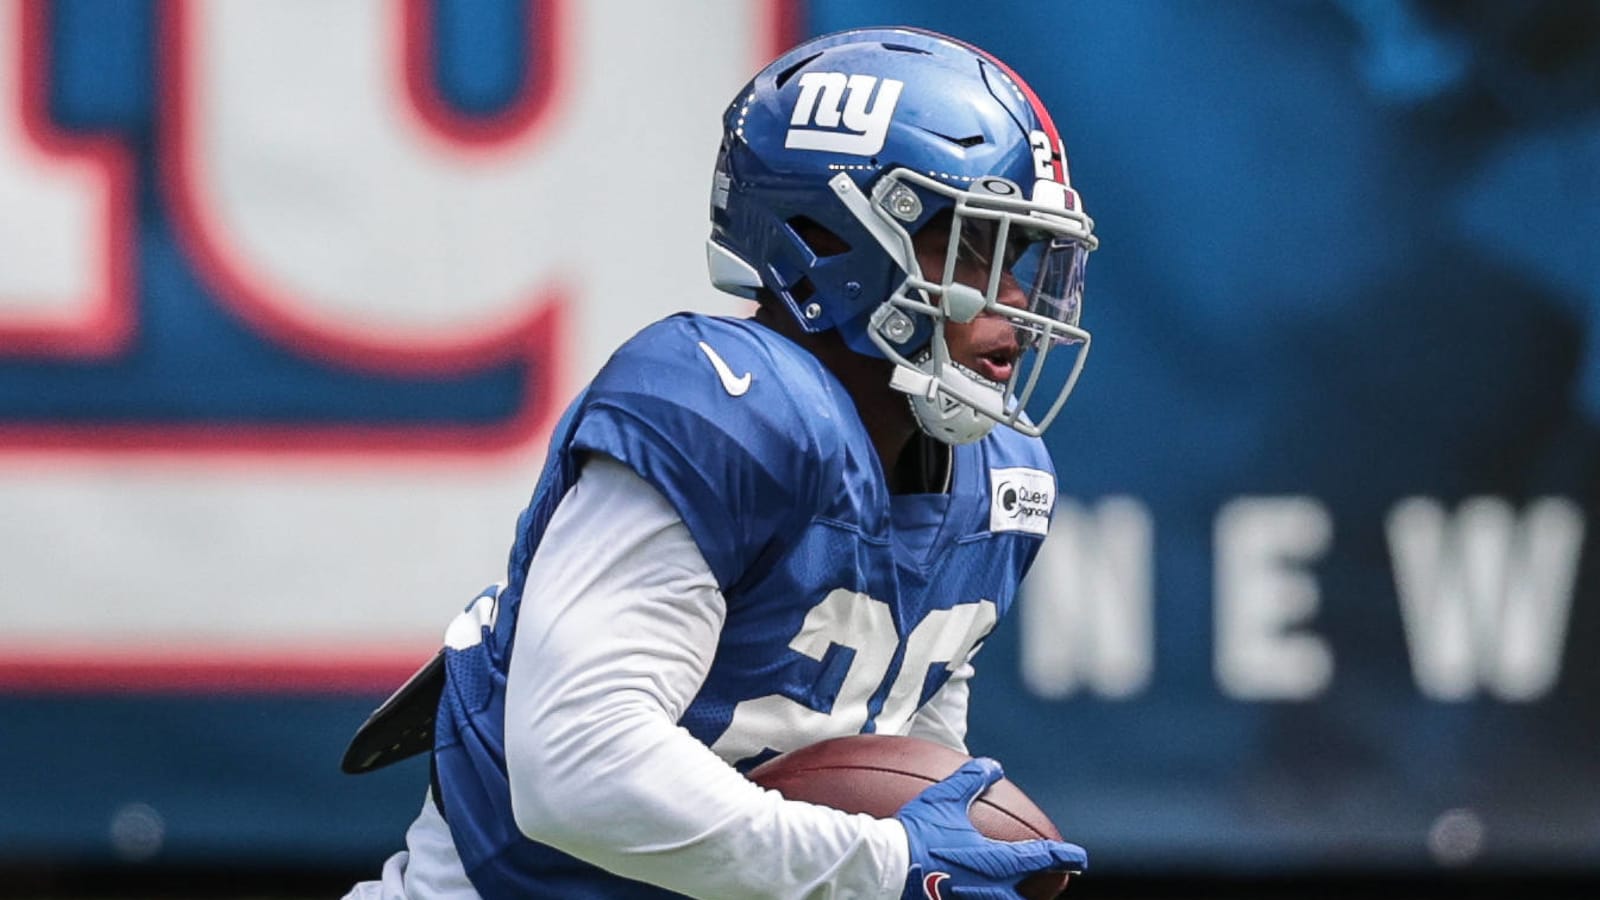 Saquon Barkley focused on recovery, not next contract